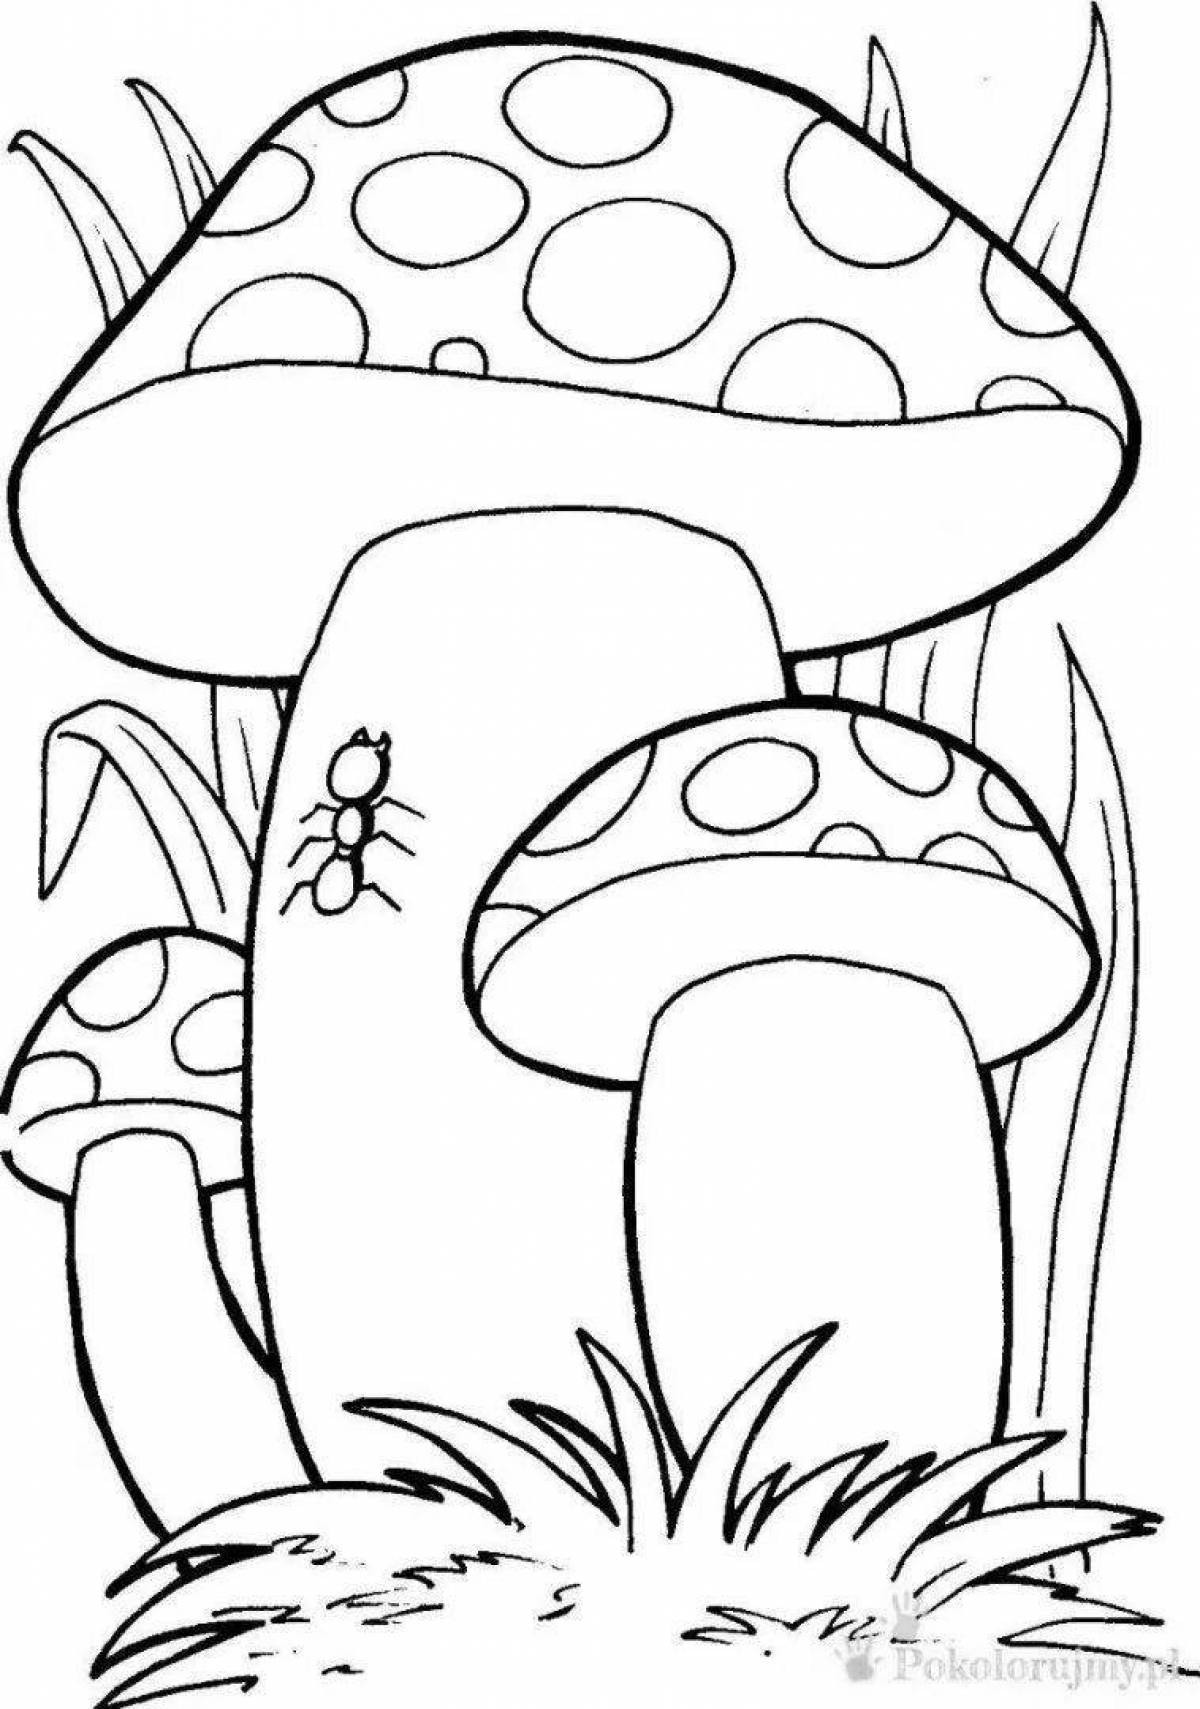 Awesome red fly agaric coloring pages